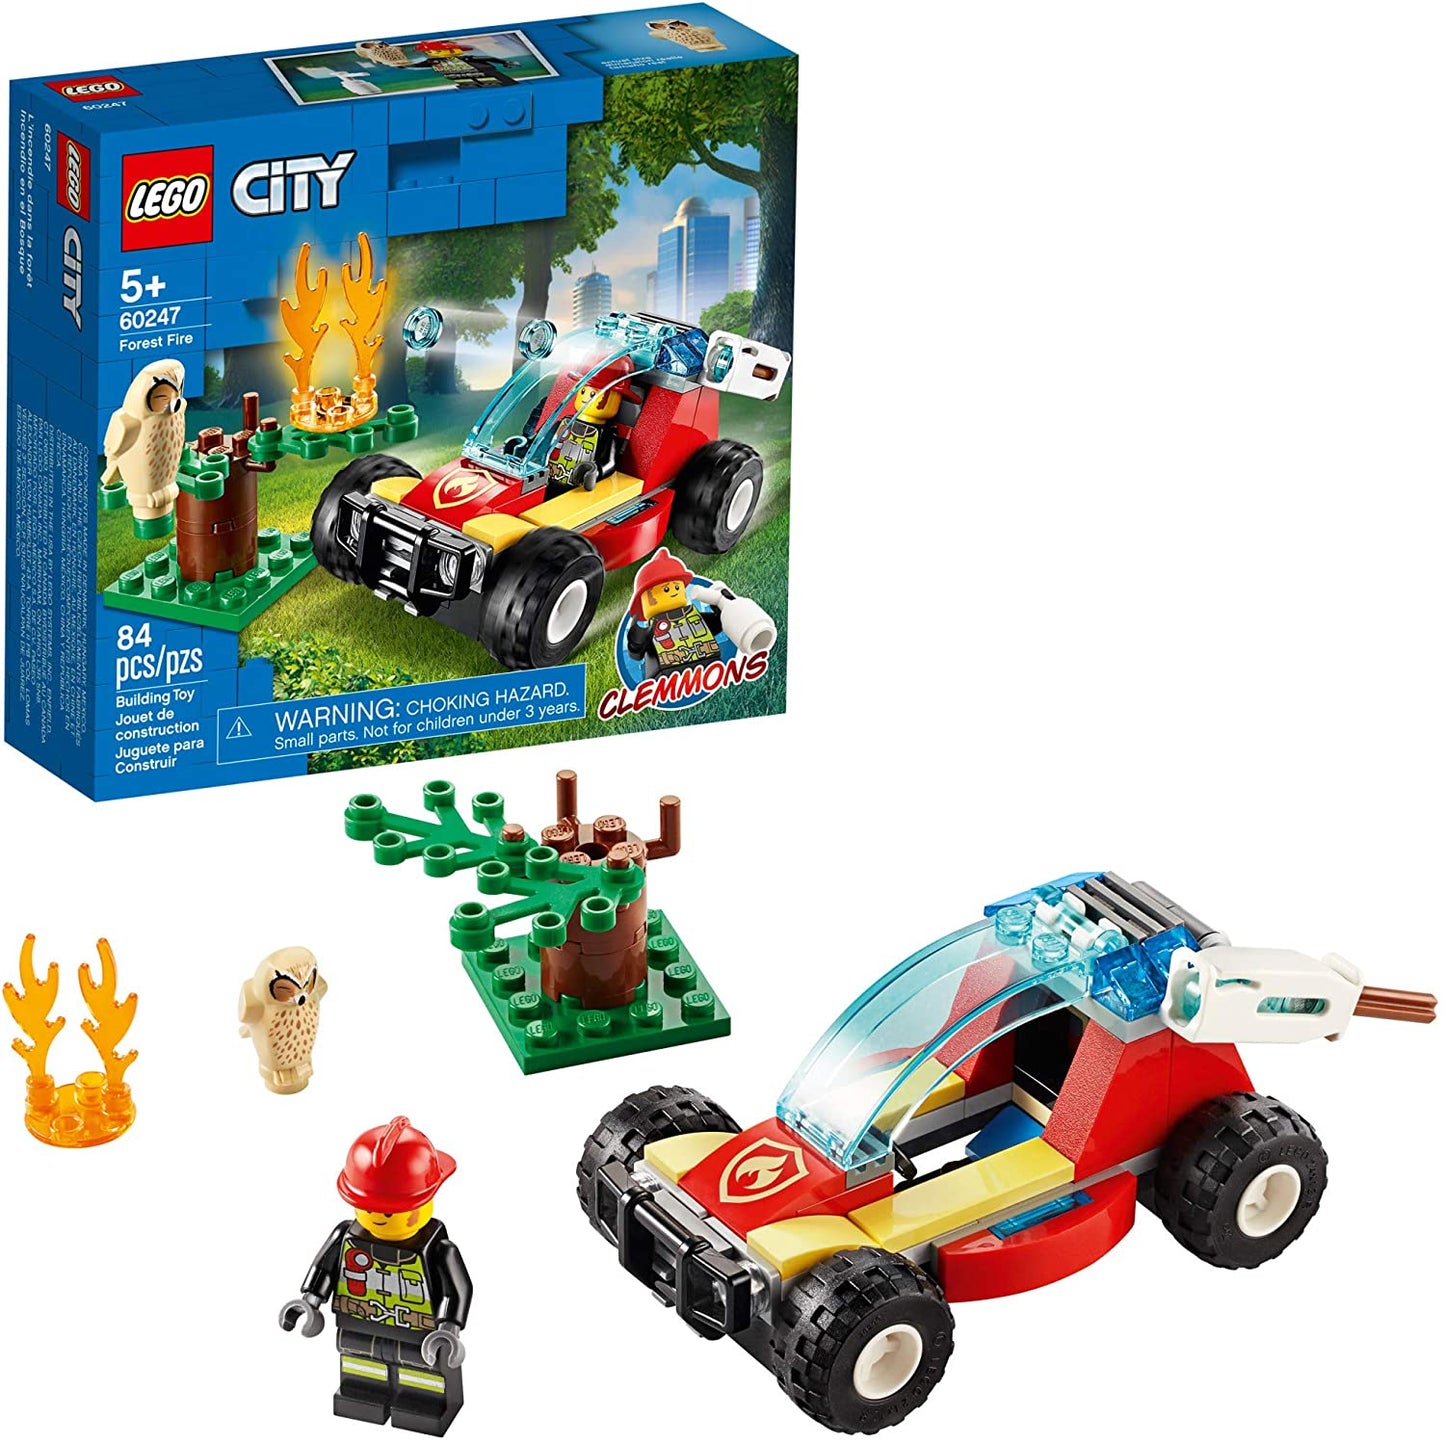 LEGO City - Forest Fire 60247